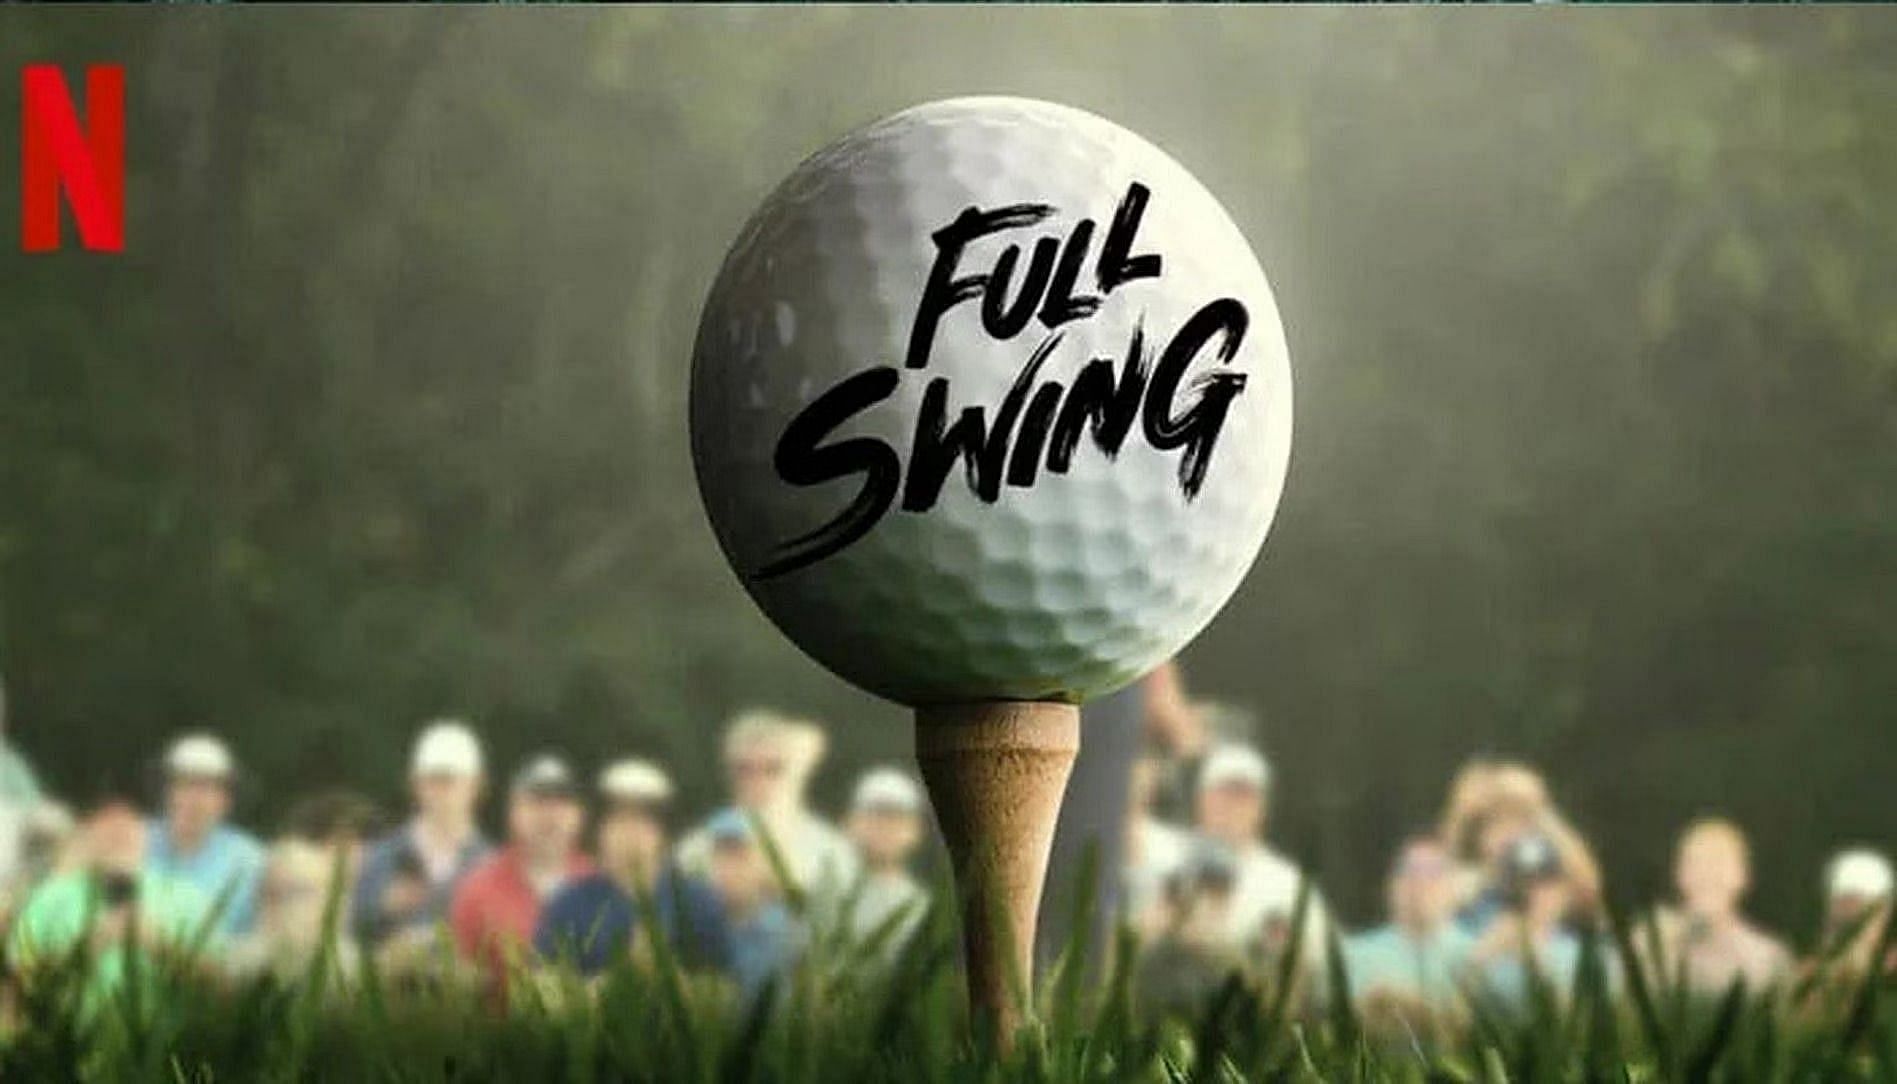 As per reports, few players are being filmed for the Full Swing season 2 at the PGA Championship